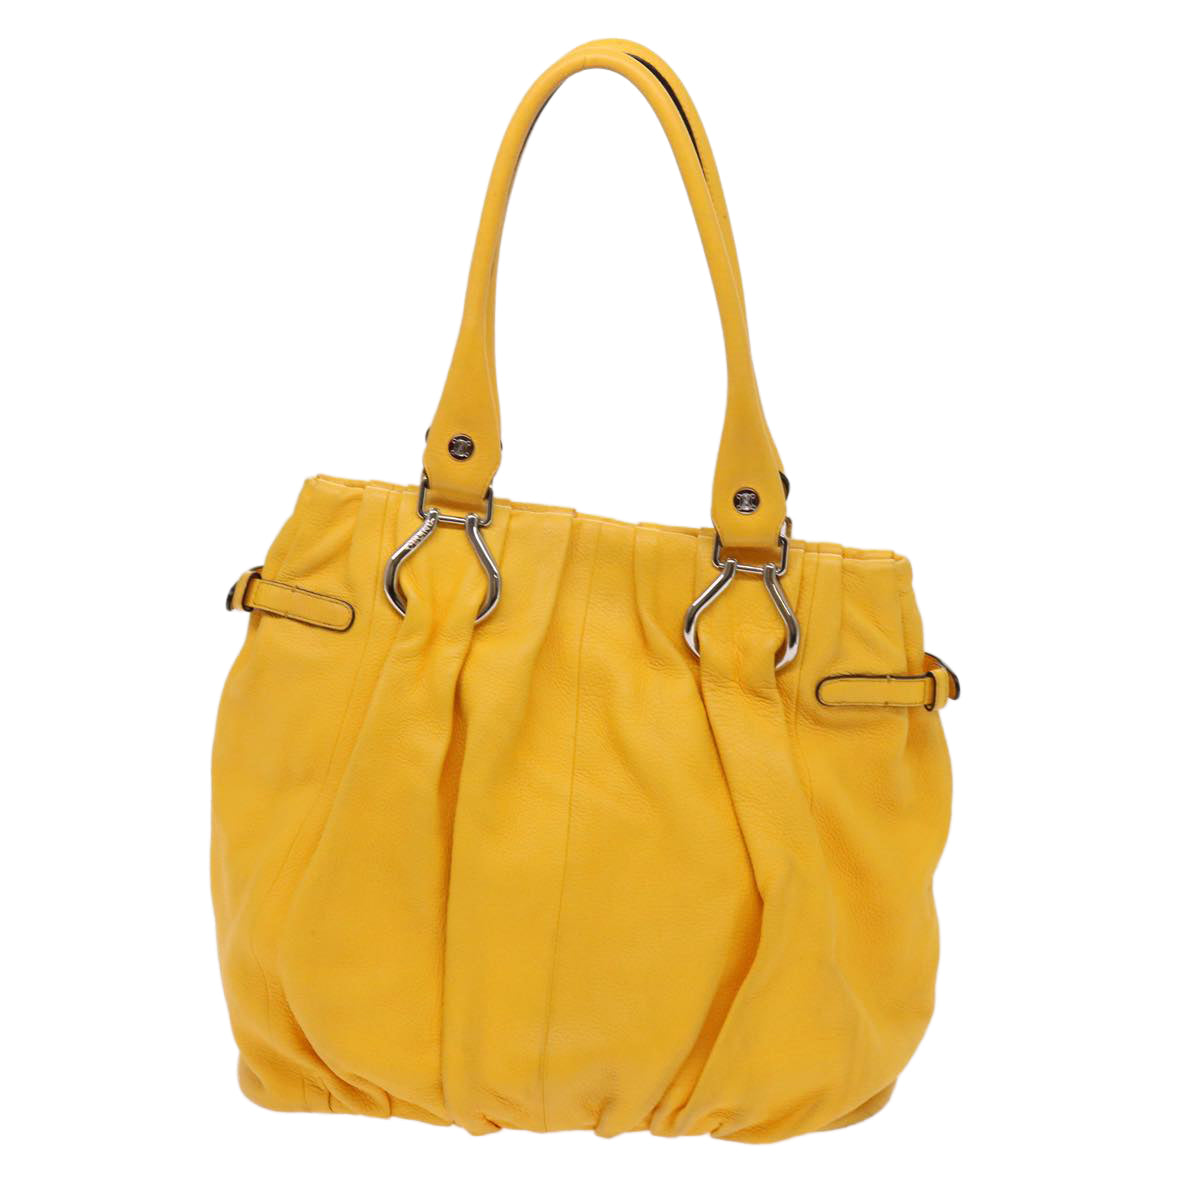 CELINE Tote Bag Leather Yellow Auth bs13073 - 0